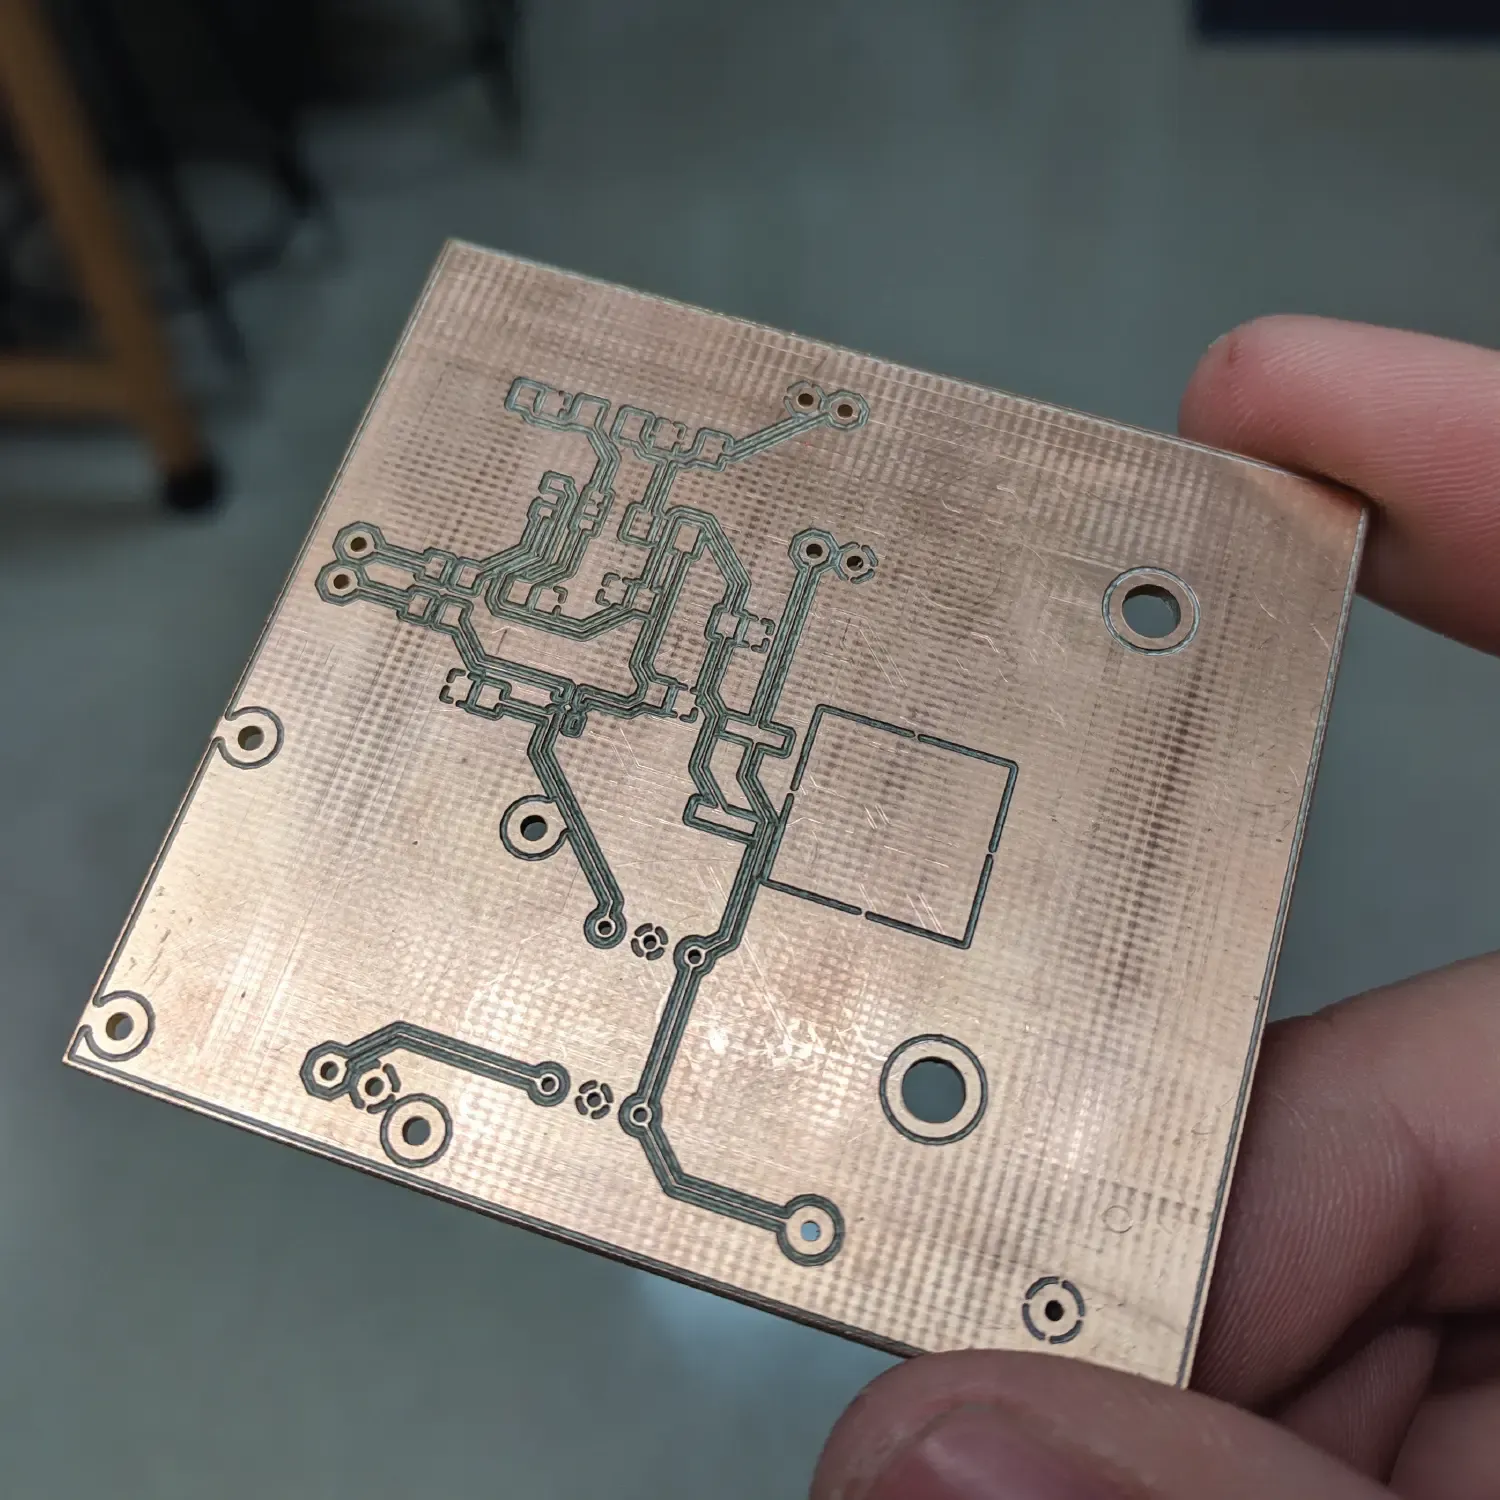 a single sided PCB milled from a copper clad board.